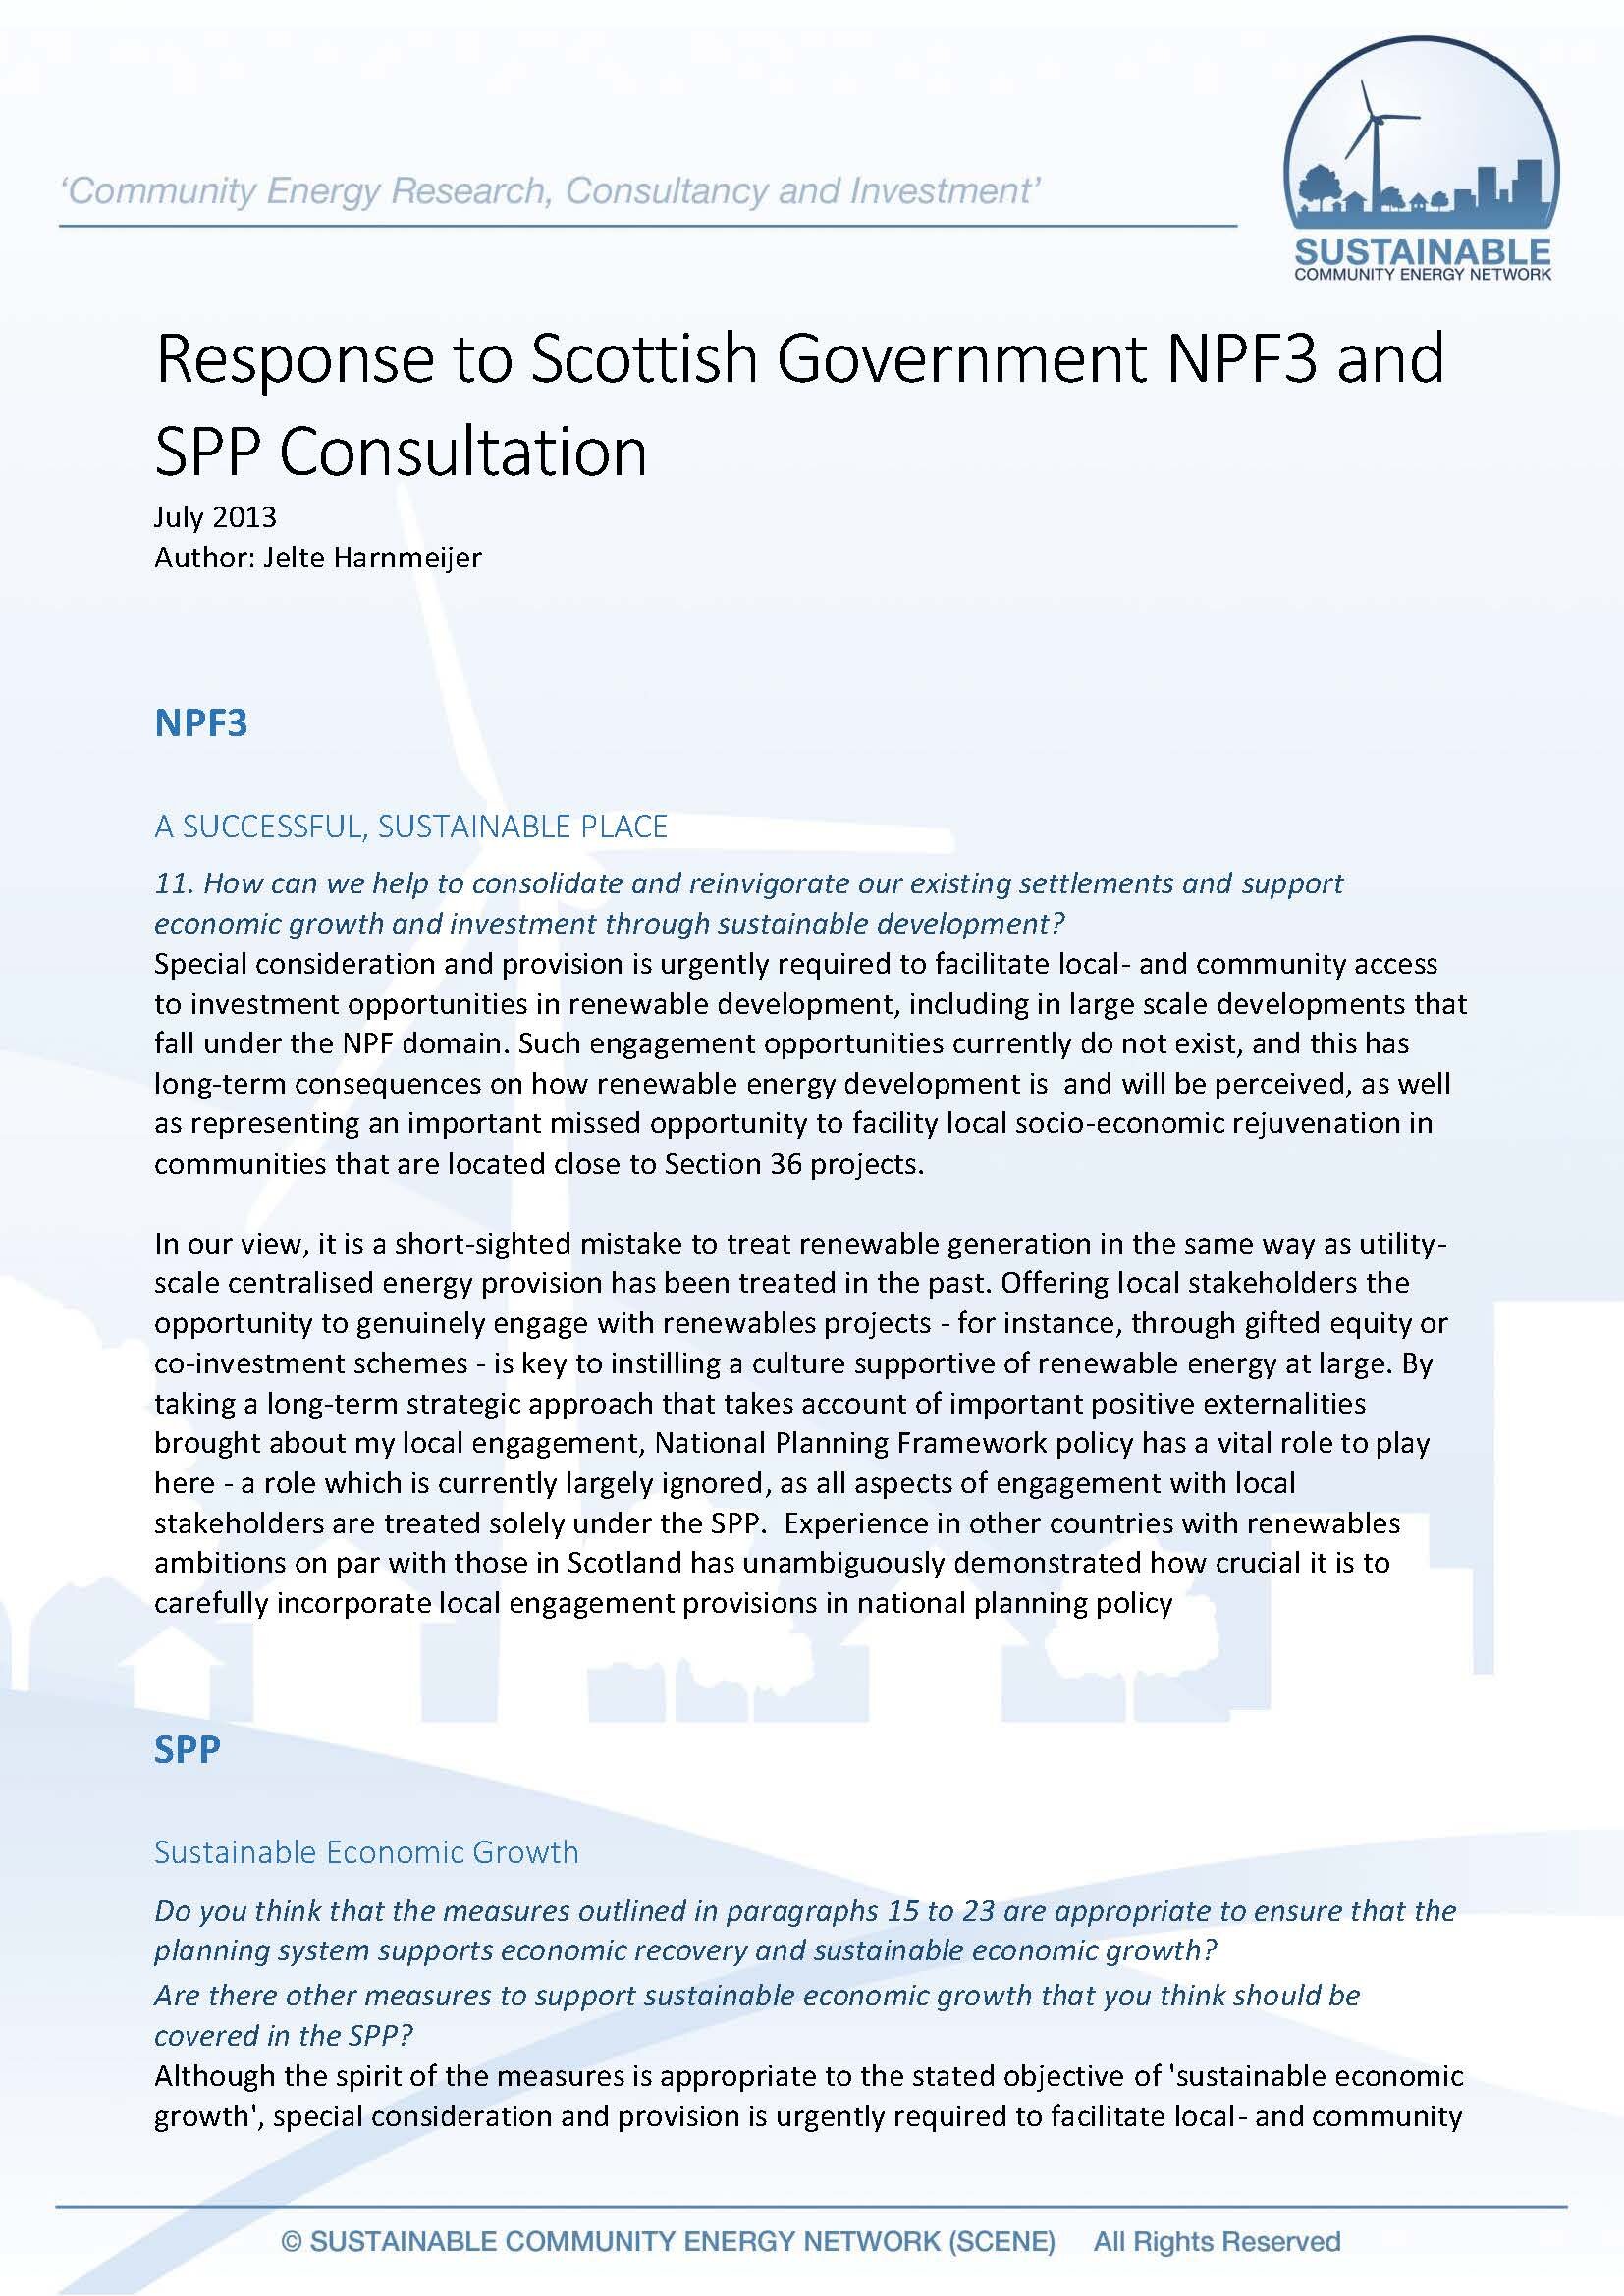 Response to Scottish Government NPF3 and SPP Consultation (July 2013)